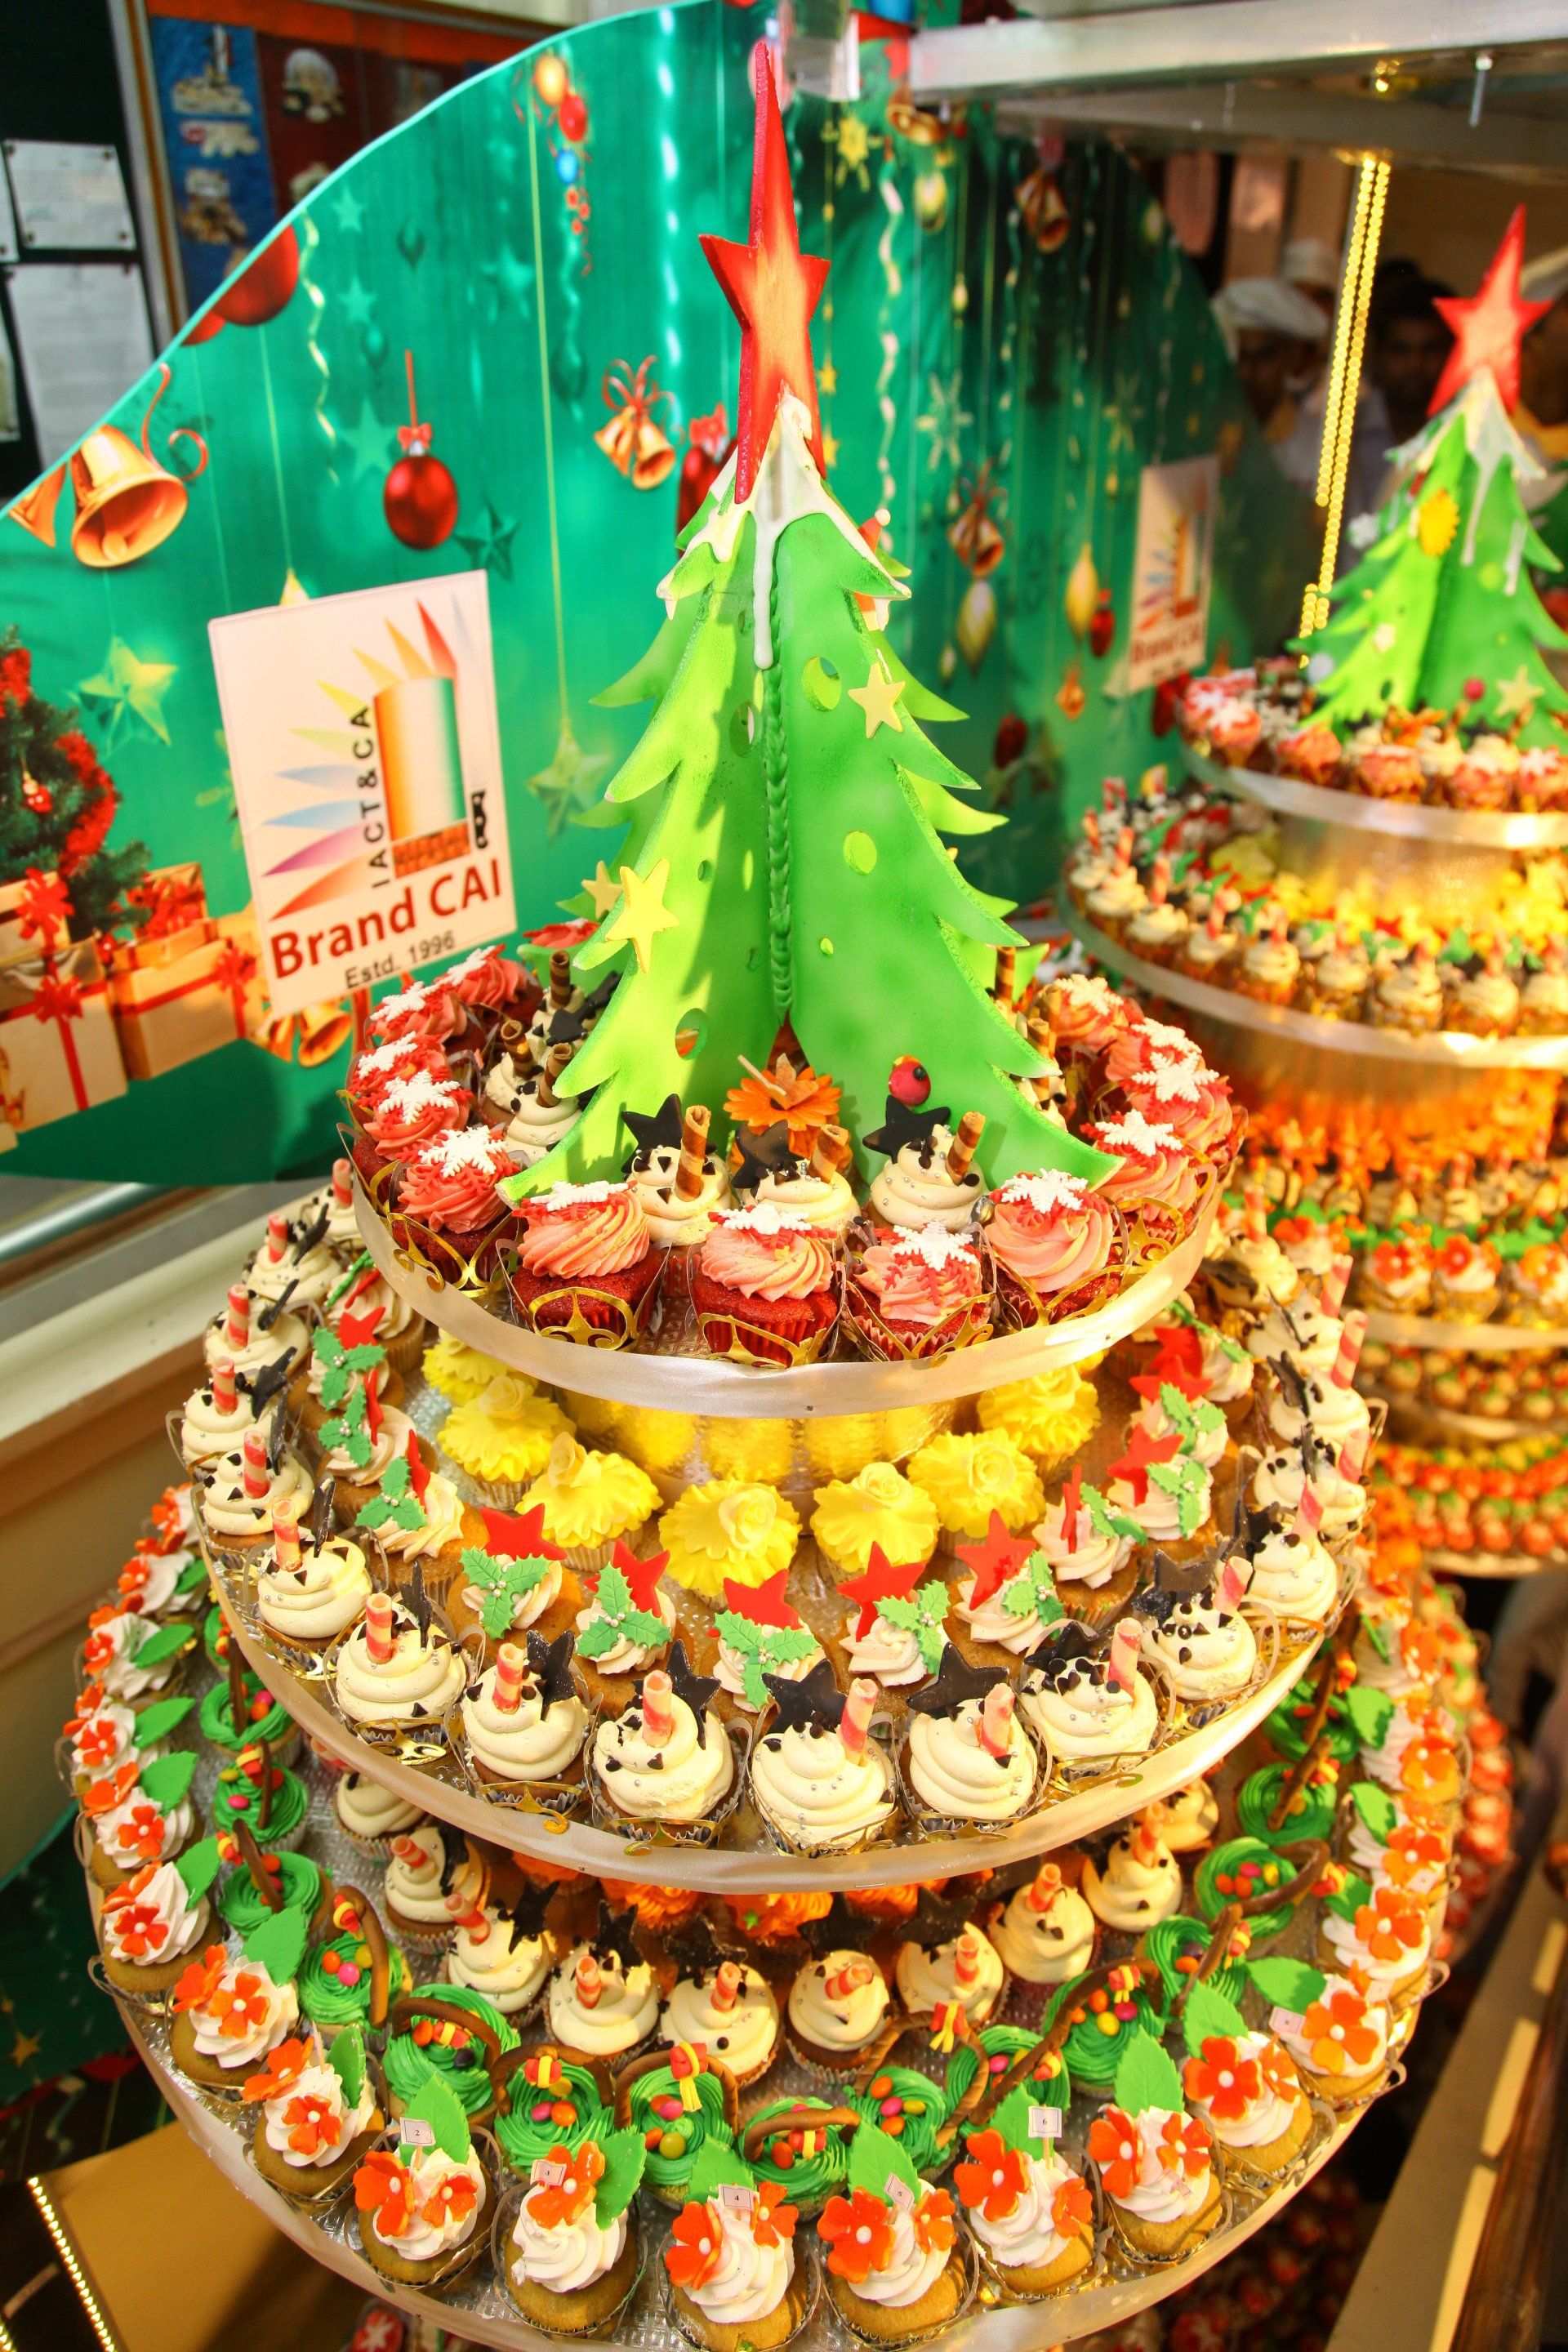 The cupcake Christmas tree was made at a cost of Rs 7.5 lakh with 100 budding chefs and 20 faculty members working on the structure for a week. 